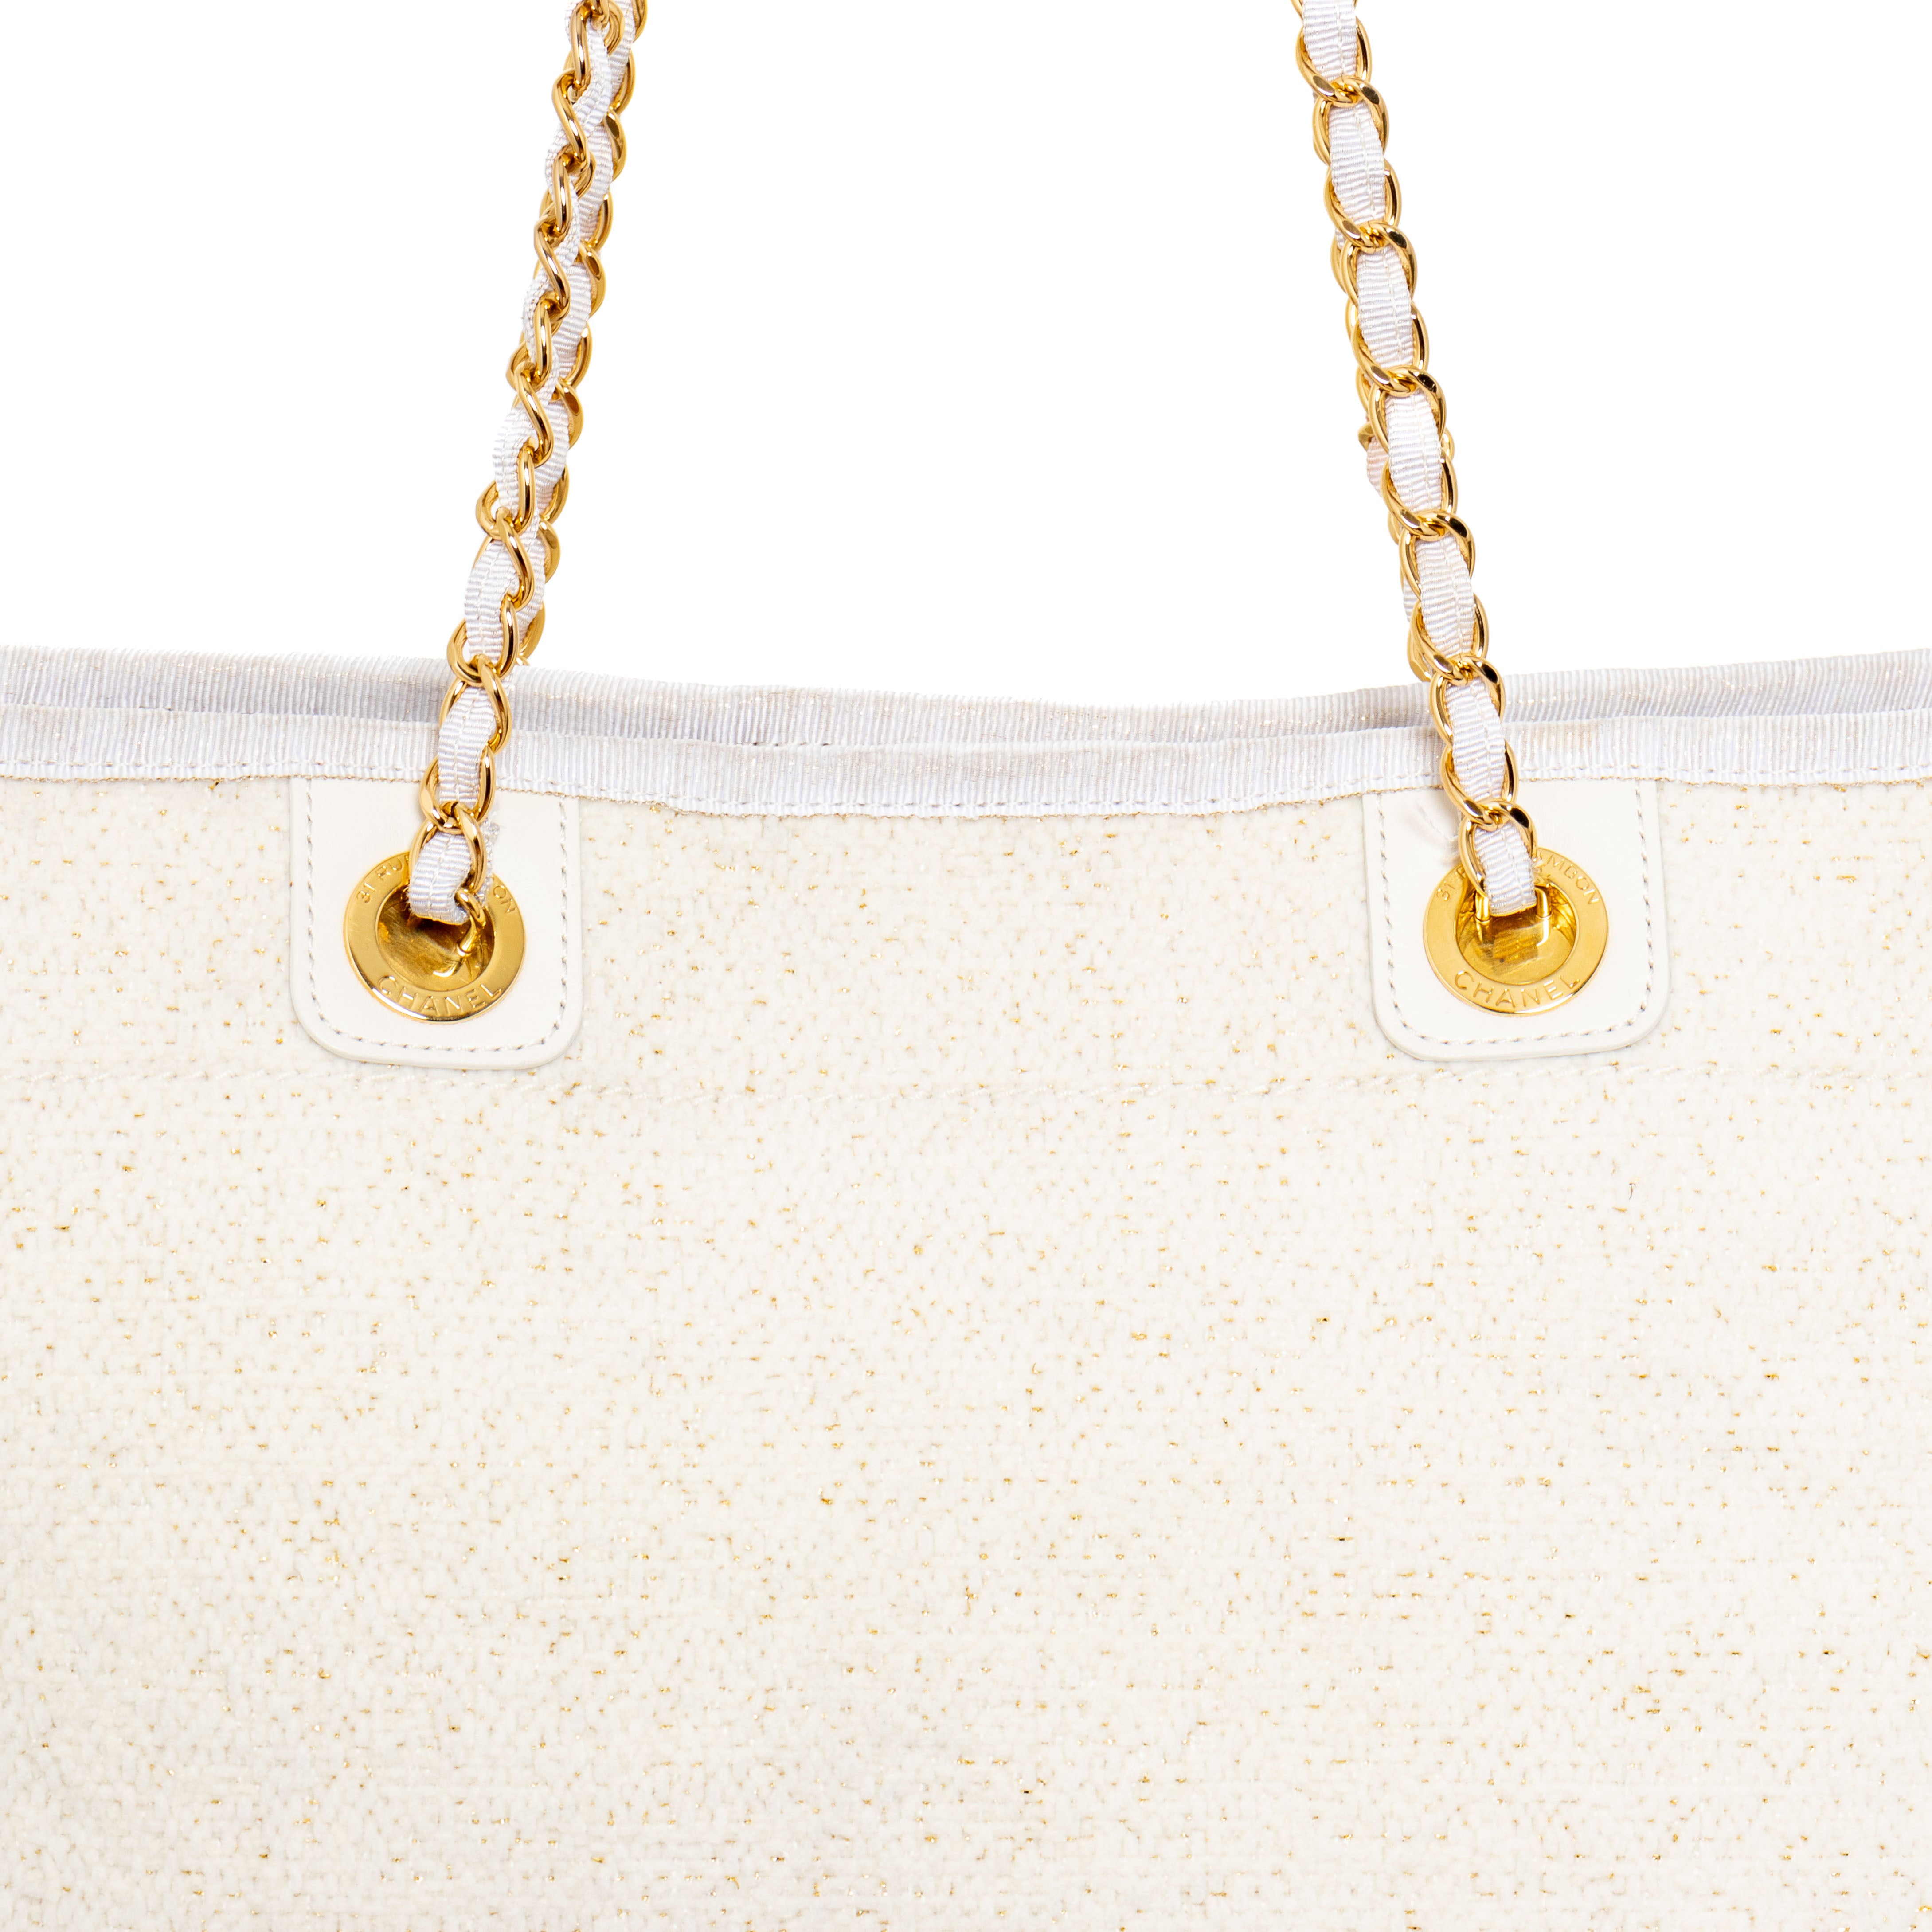 Chanel Deauville Tote Canvas Small Yellow